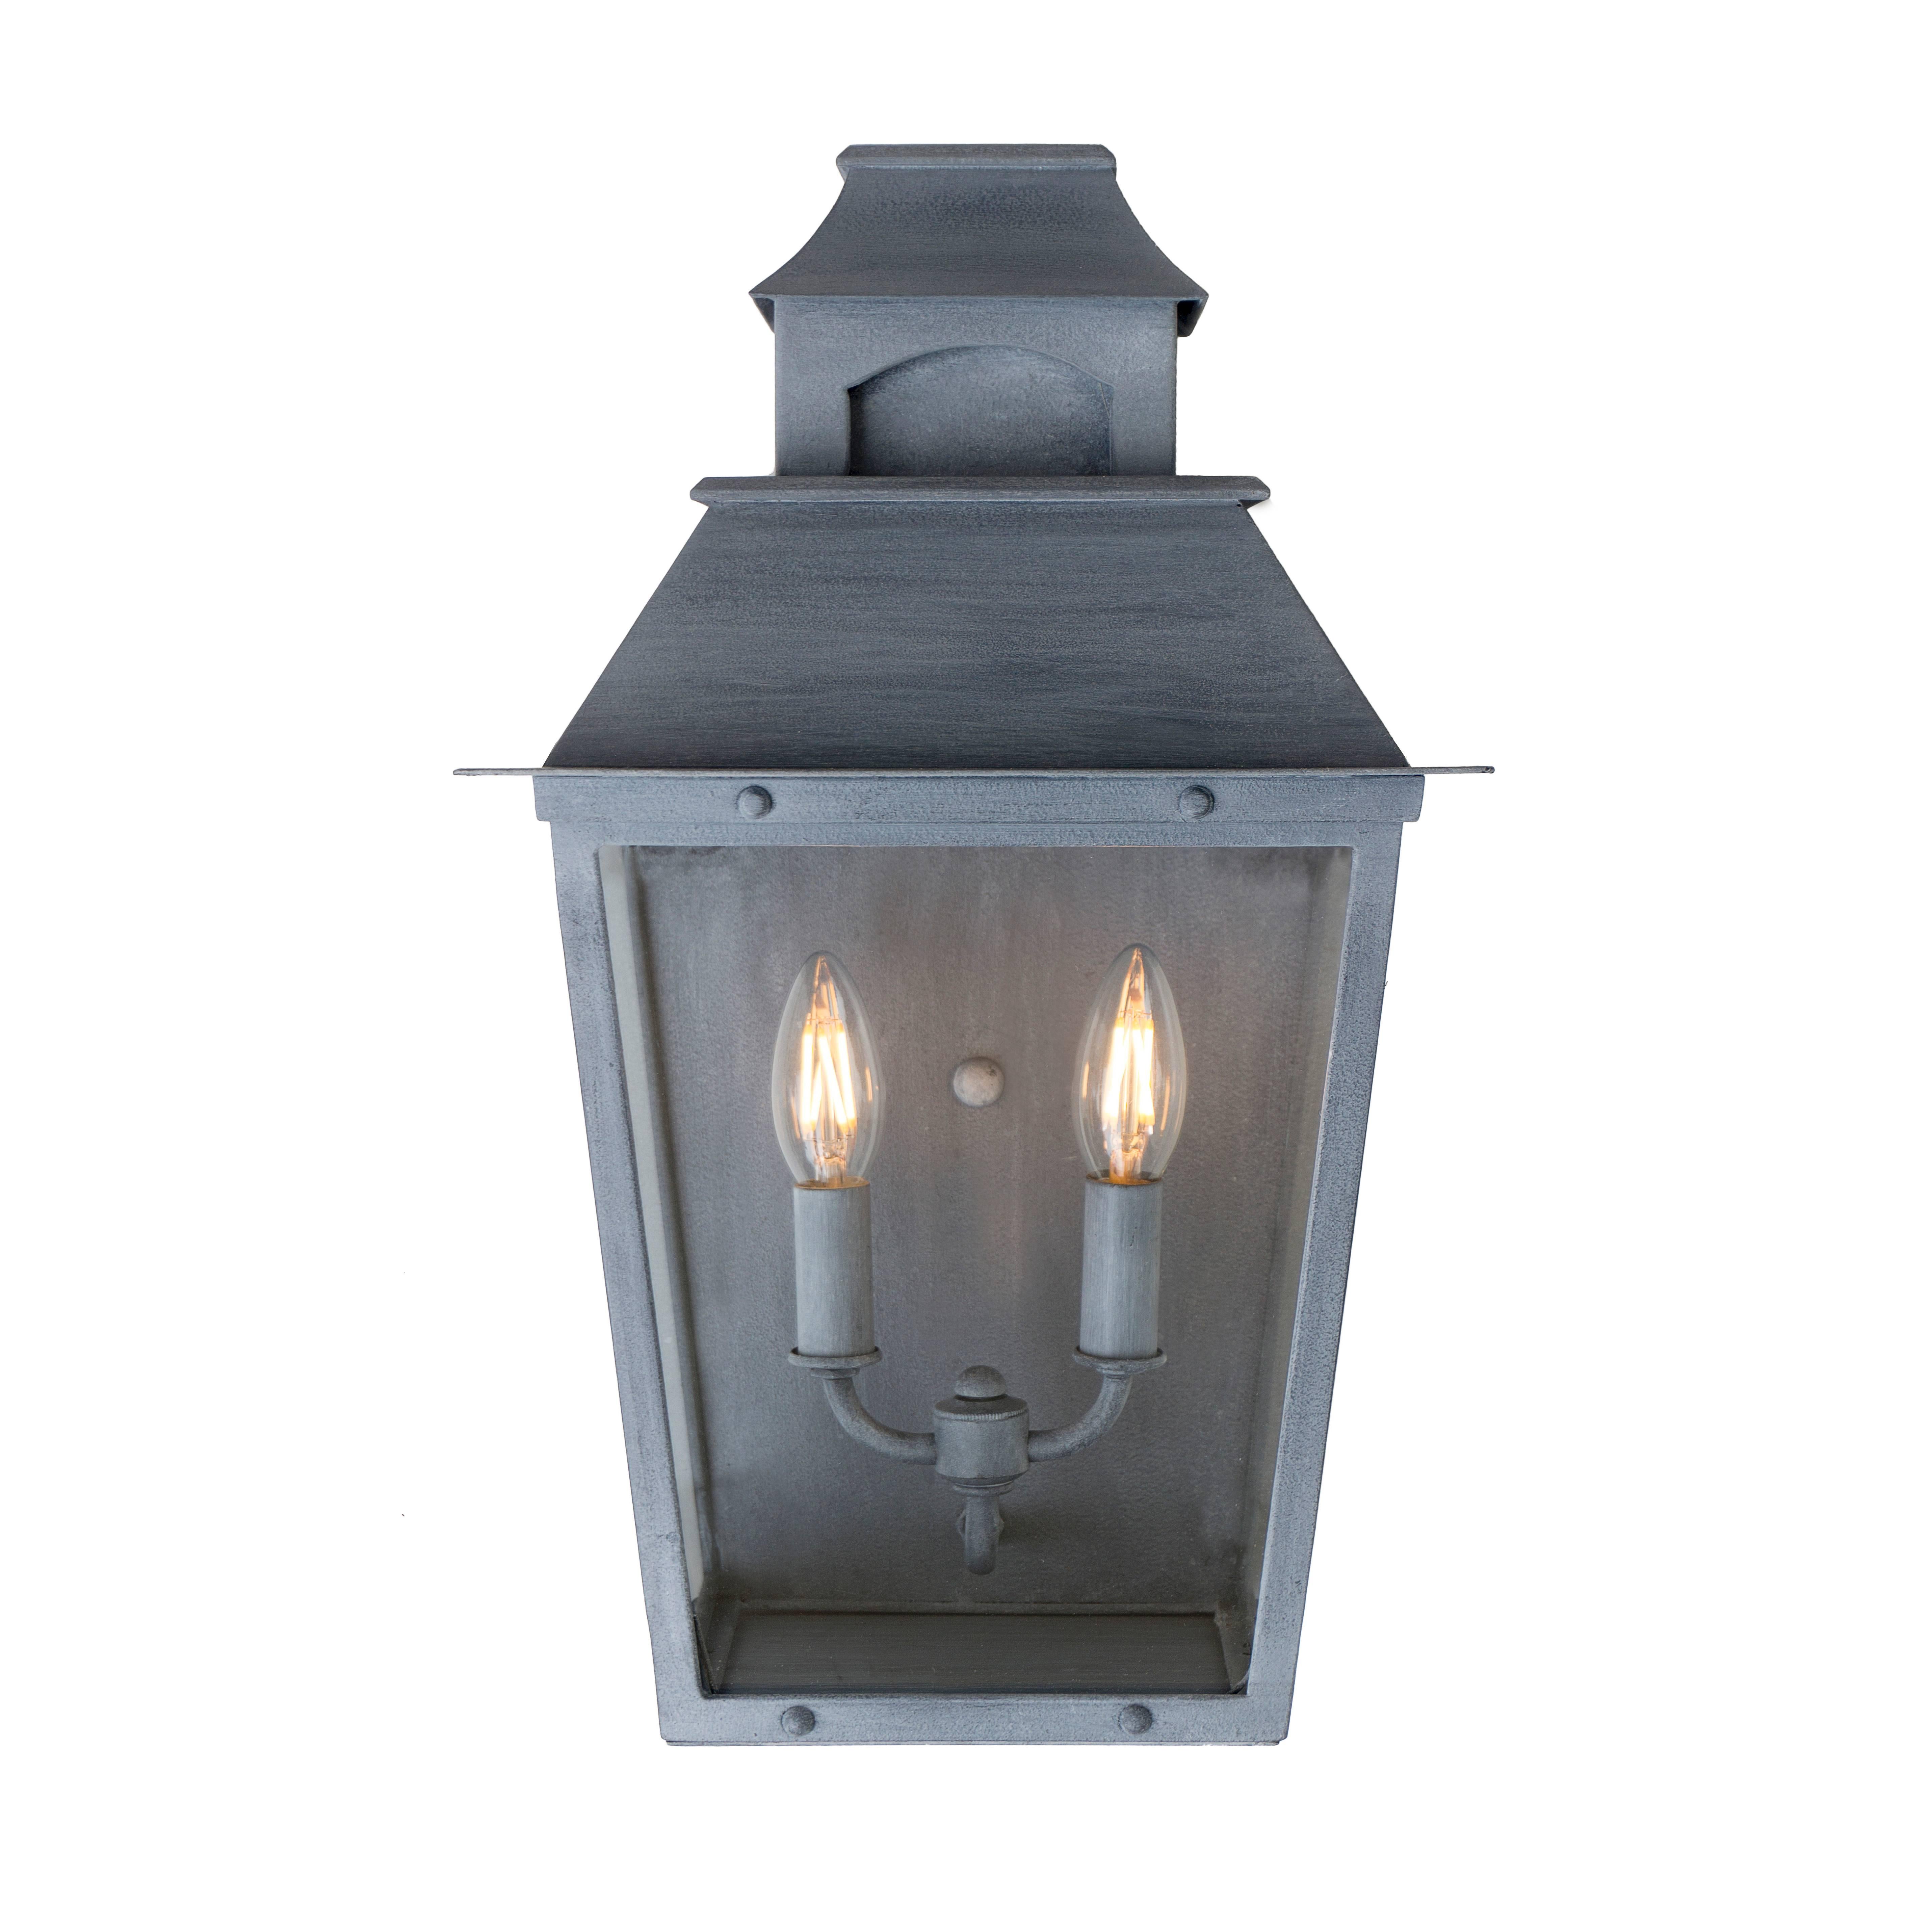 Elegantly appointed exterior wall sconce capturing the essence of a true colonial lantern.

Flush wall mount lantern with clear glass and a premium zinc finish. 
Two candelabra max wattage 80.
Center mounting hole.

[Finish samples are available.